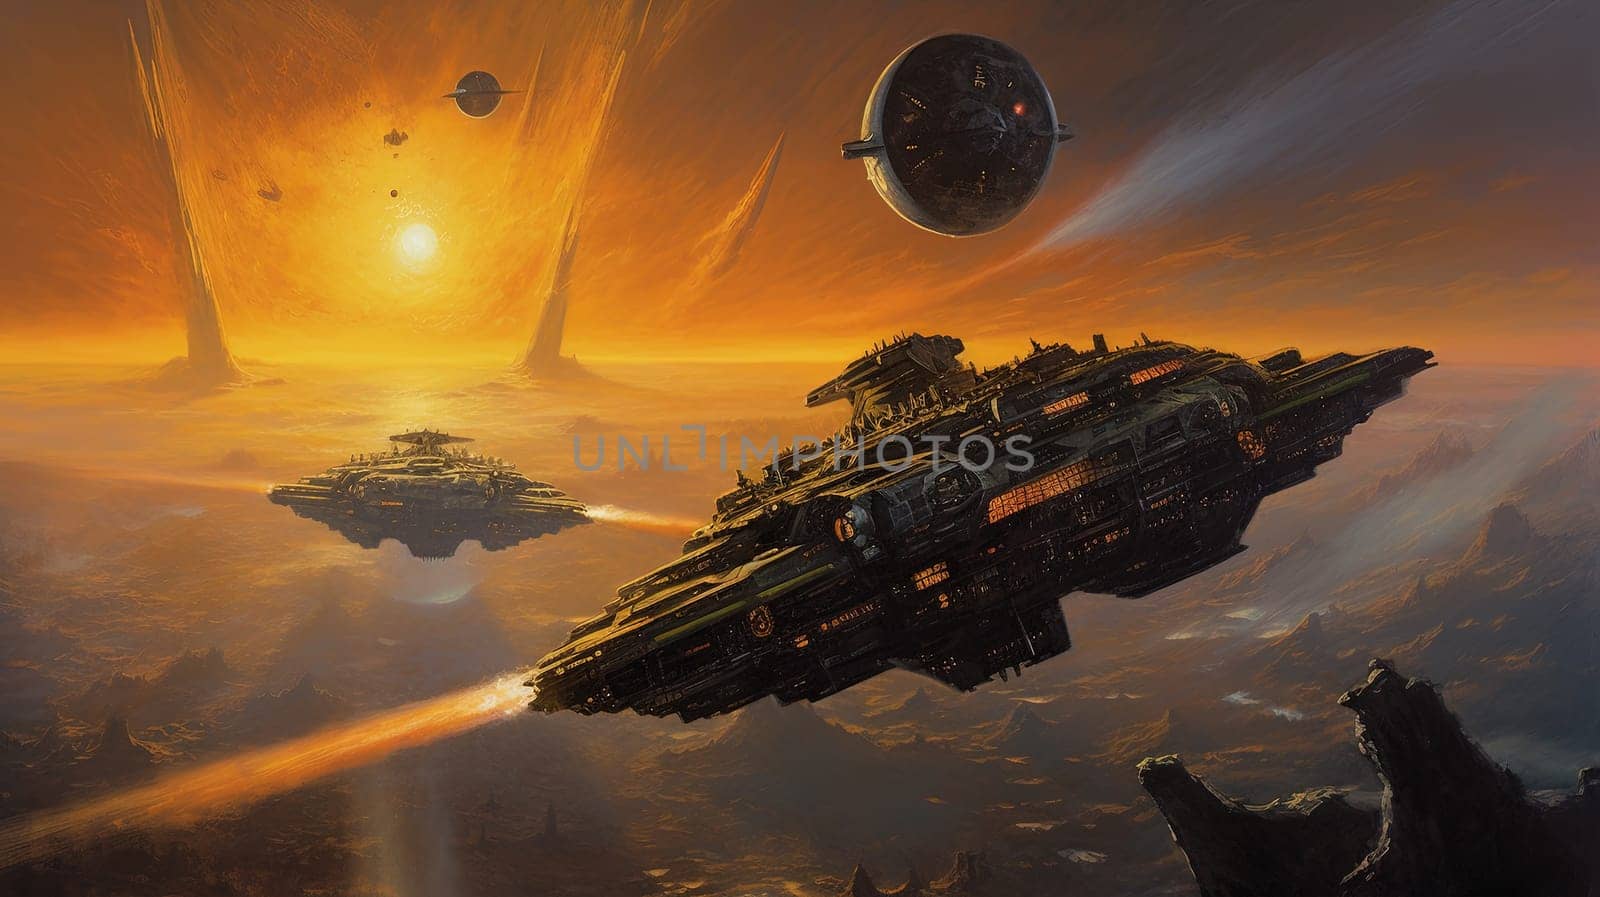 Space ships battle over alien planet in 80s books style. Retro science fiction illustration. Generated AI